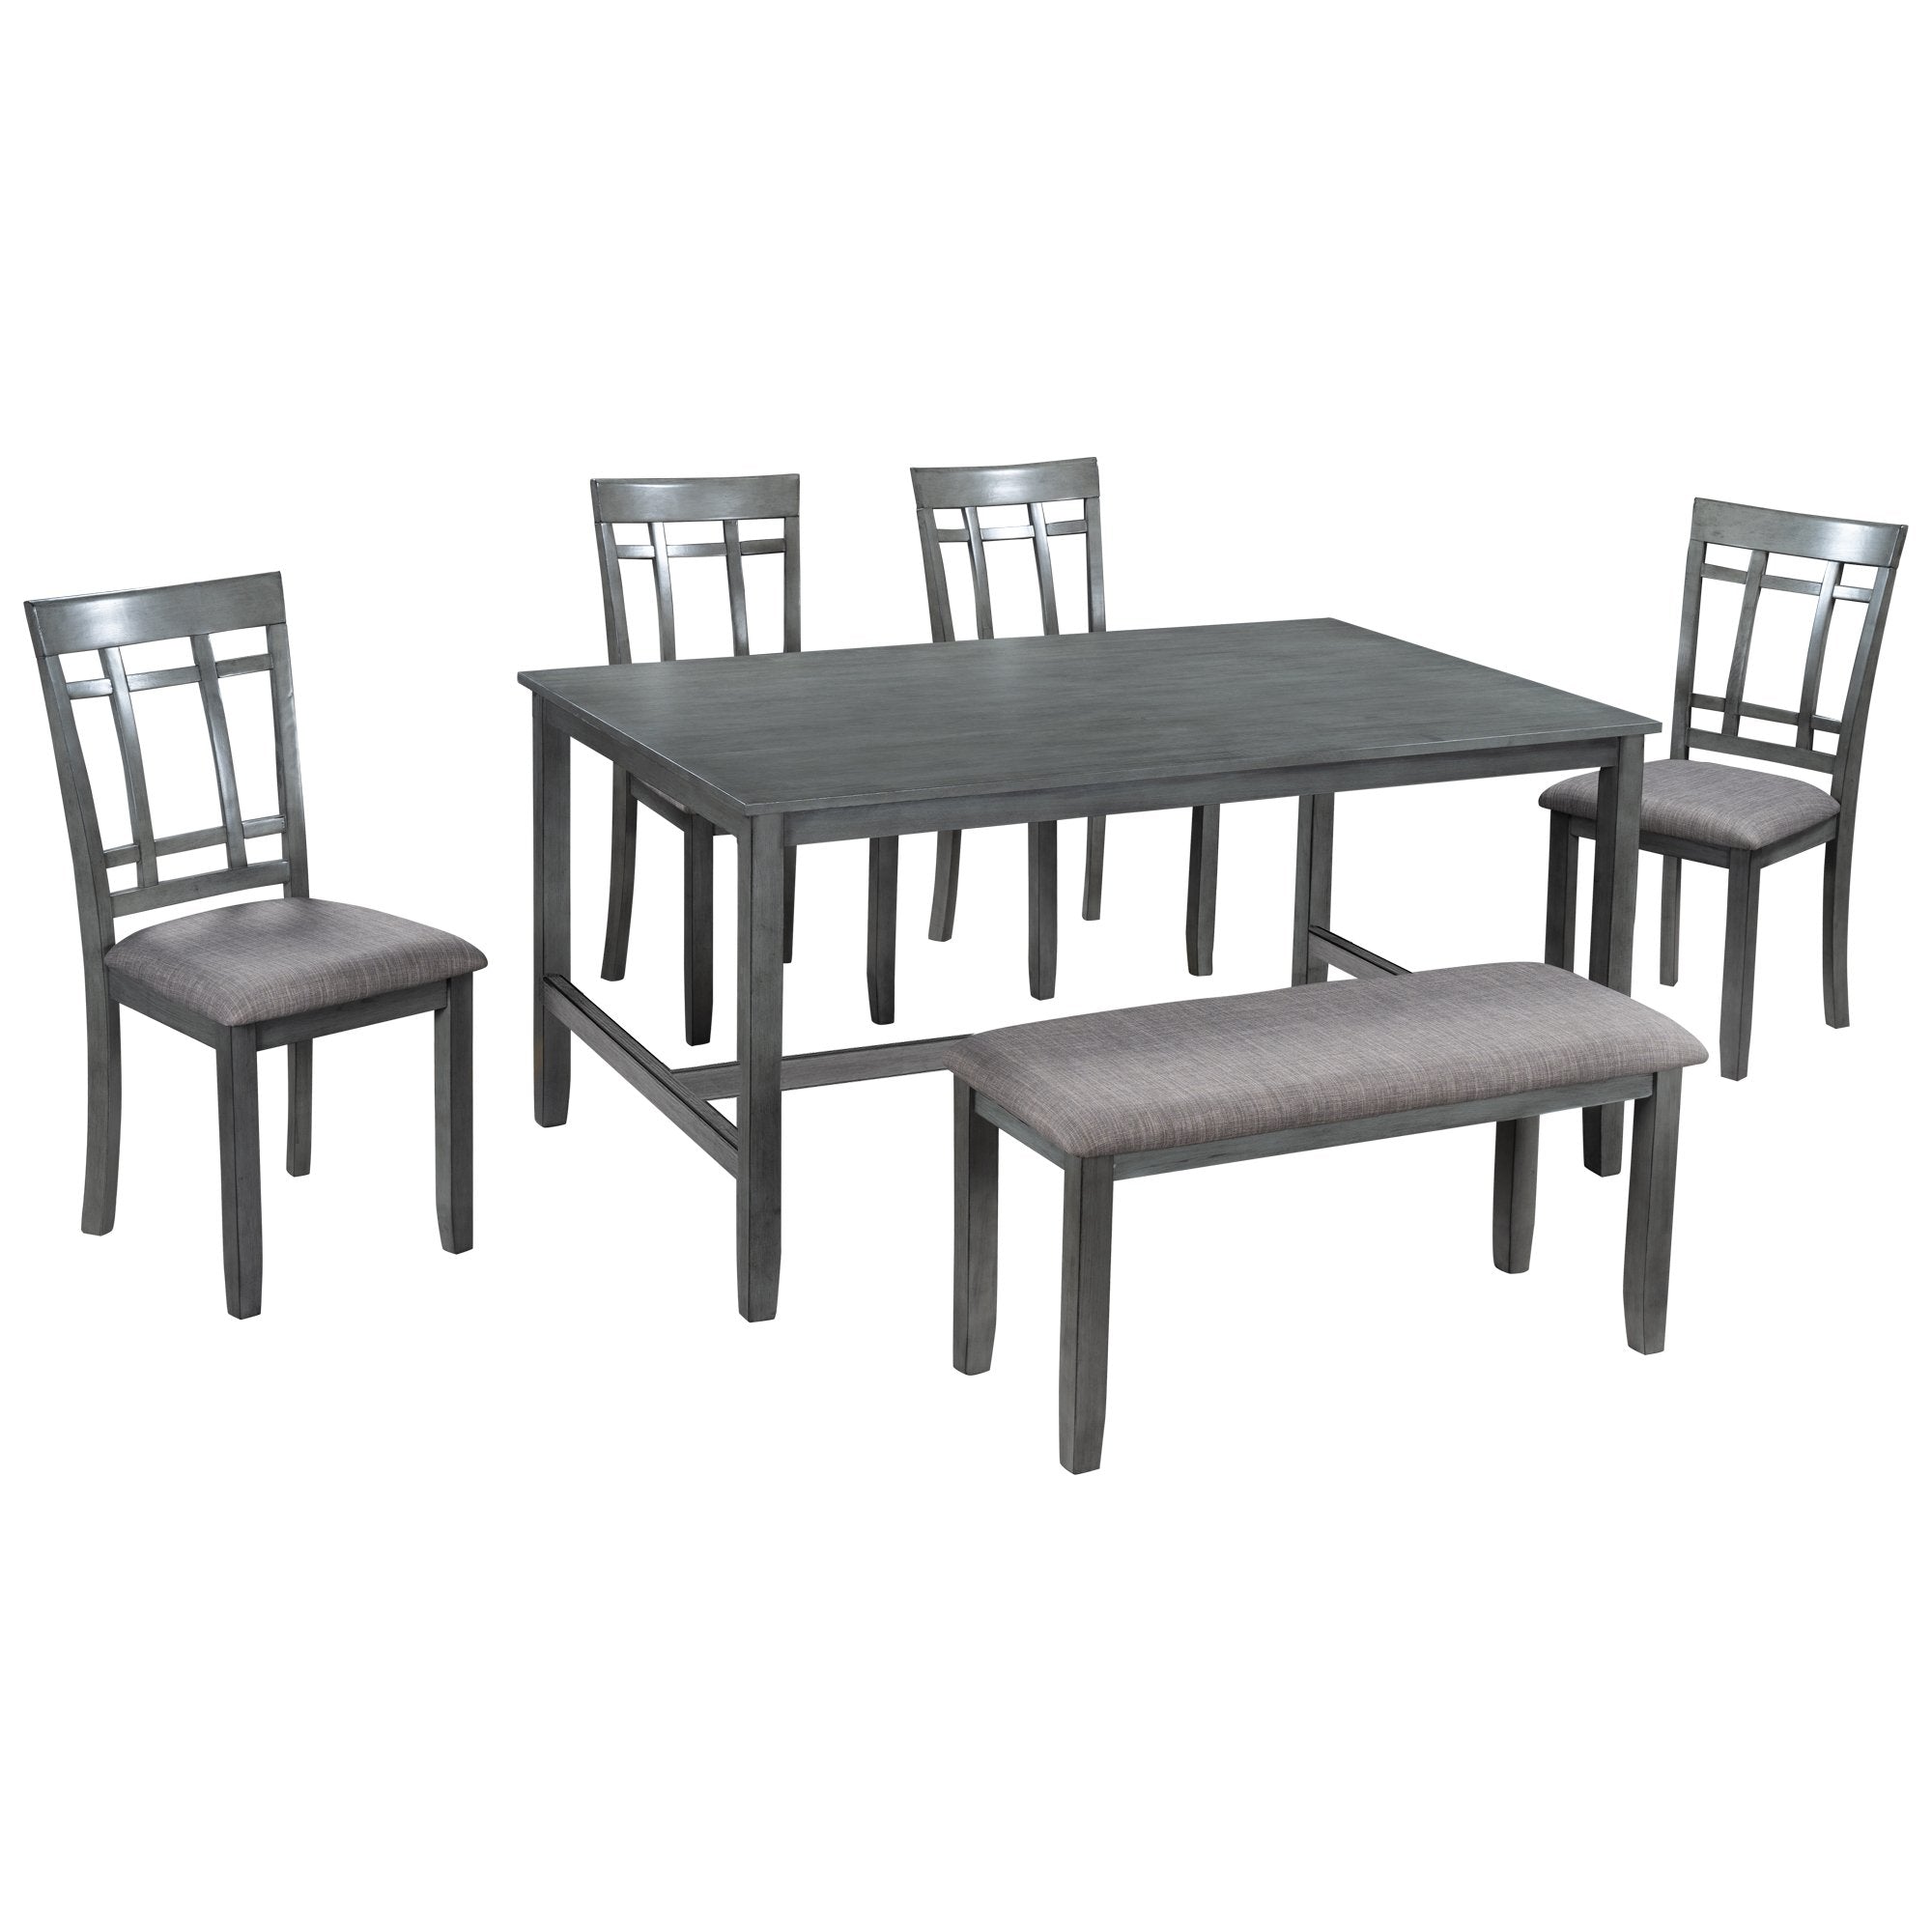 6 Piece Wooden Dining Table set, Kitchen Table set with 4 Chairs and Bench, Farmhouse Rustic Style,Antique Graywash-Boyel Living